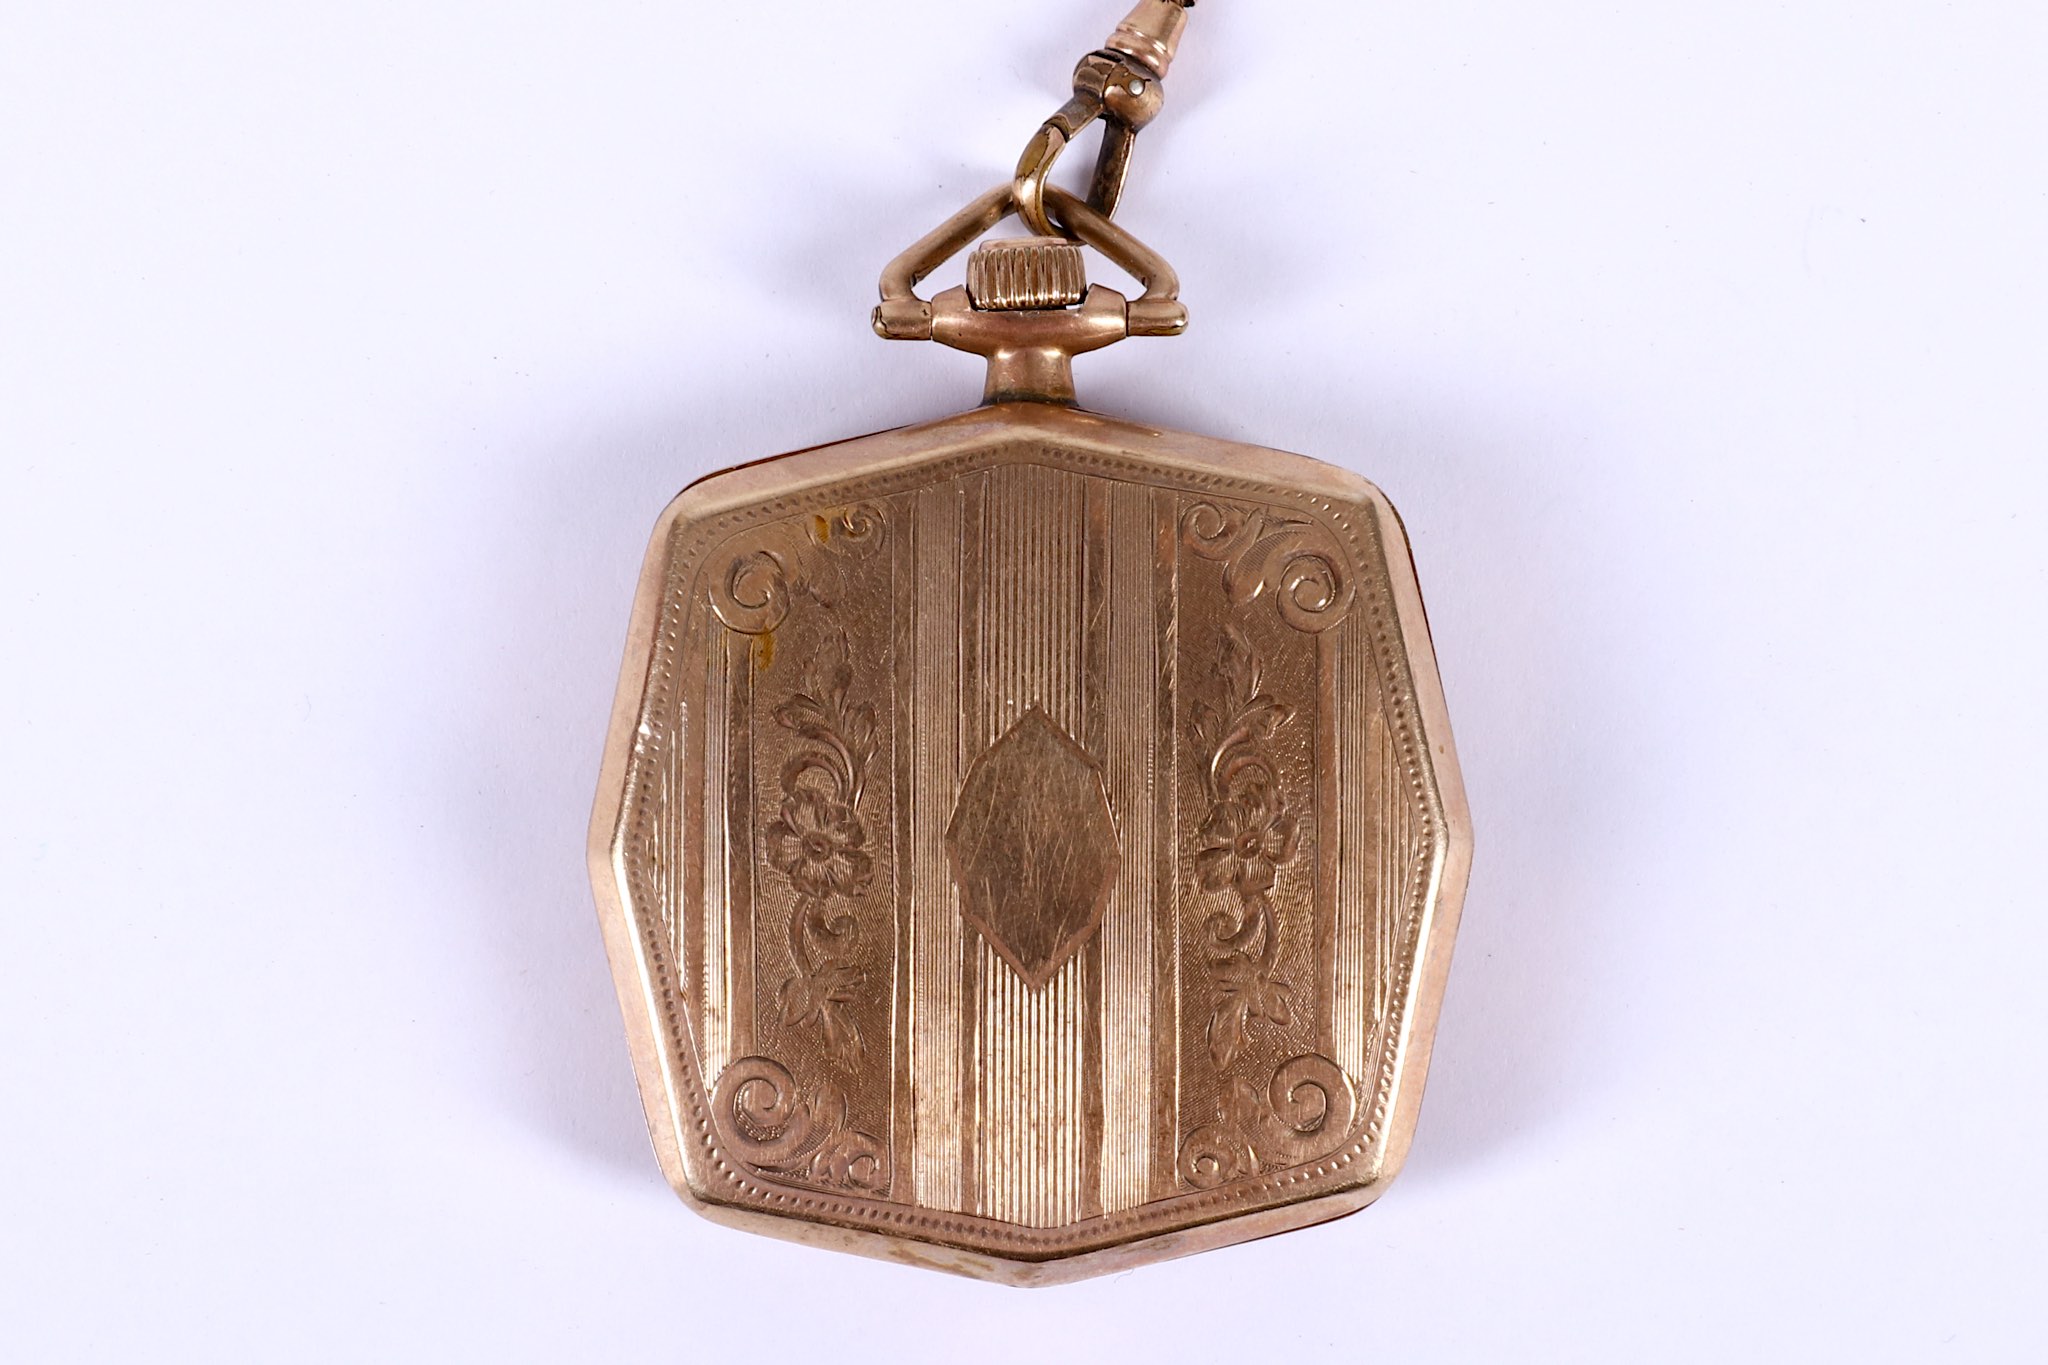 An American Art Deco, Springfield of Illinois Watch Co., gold plated gentleman's pocket watch on a - Image 3 of 3